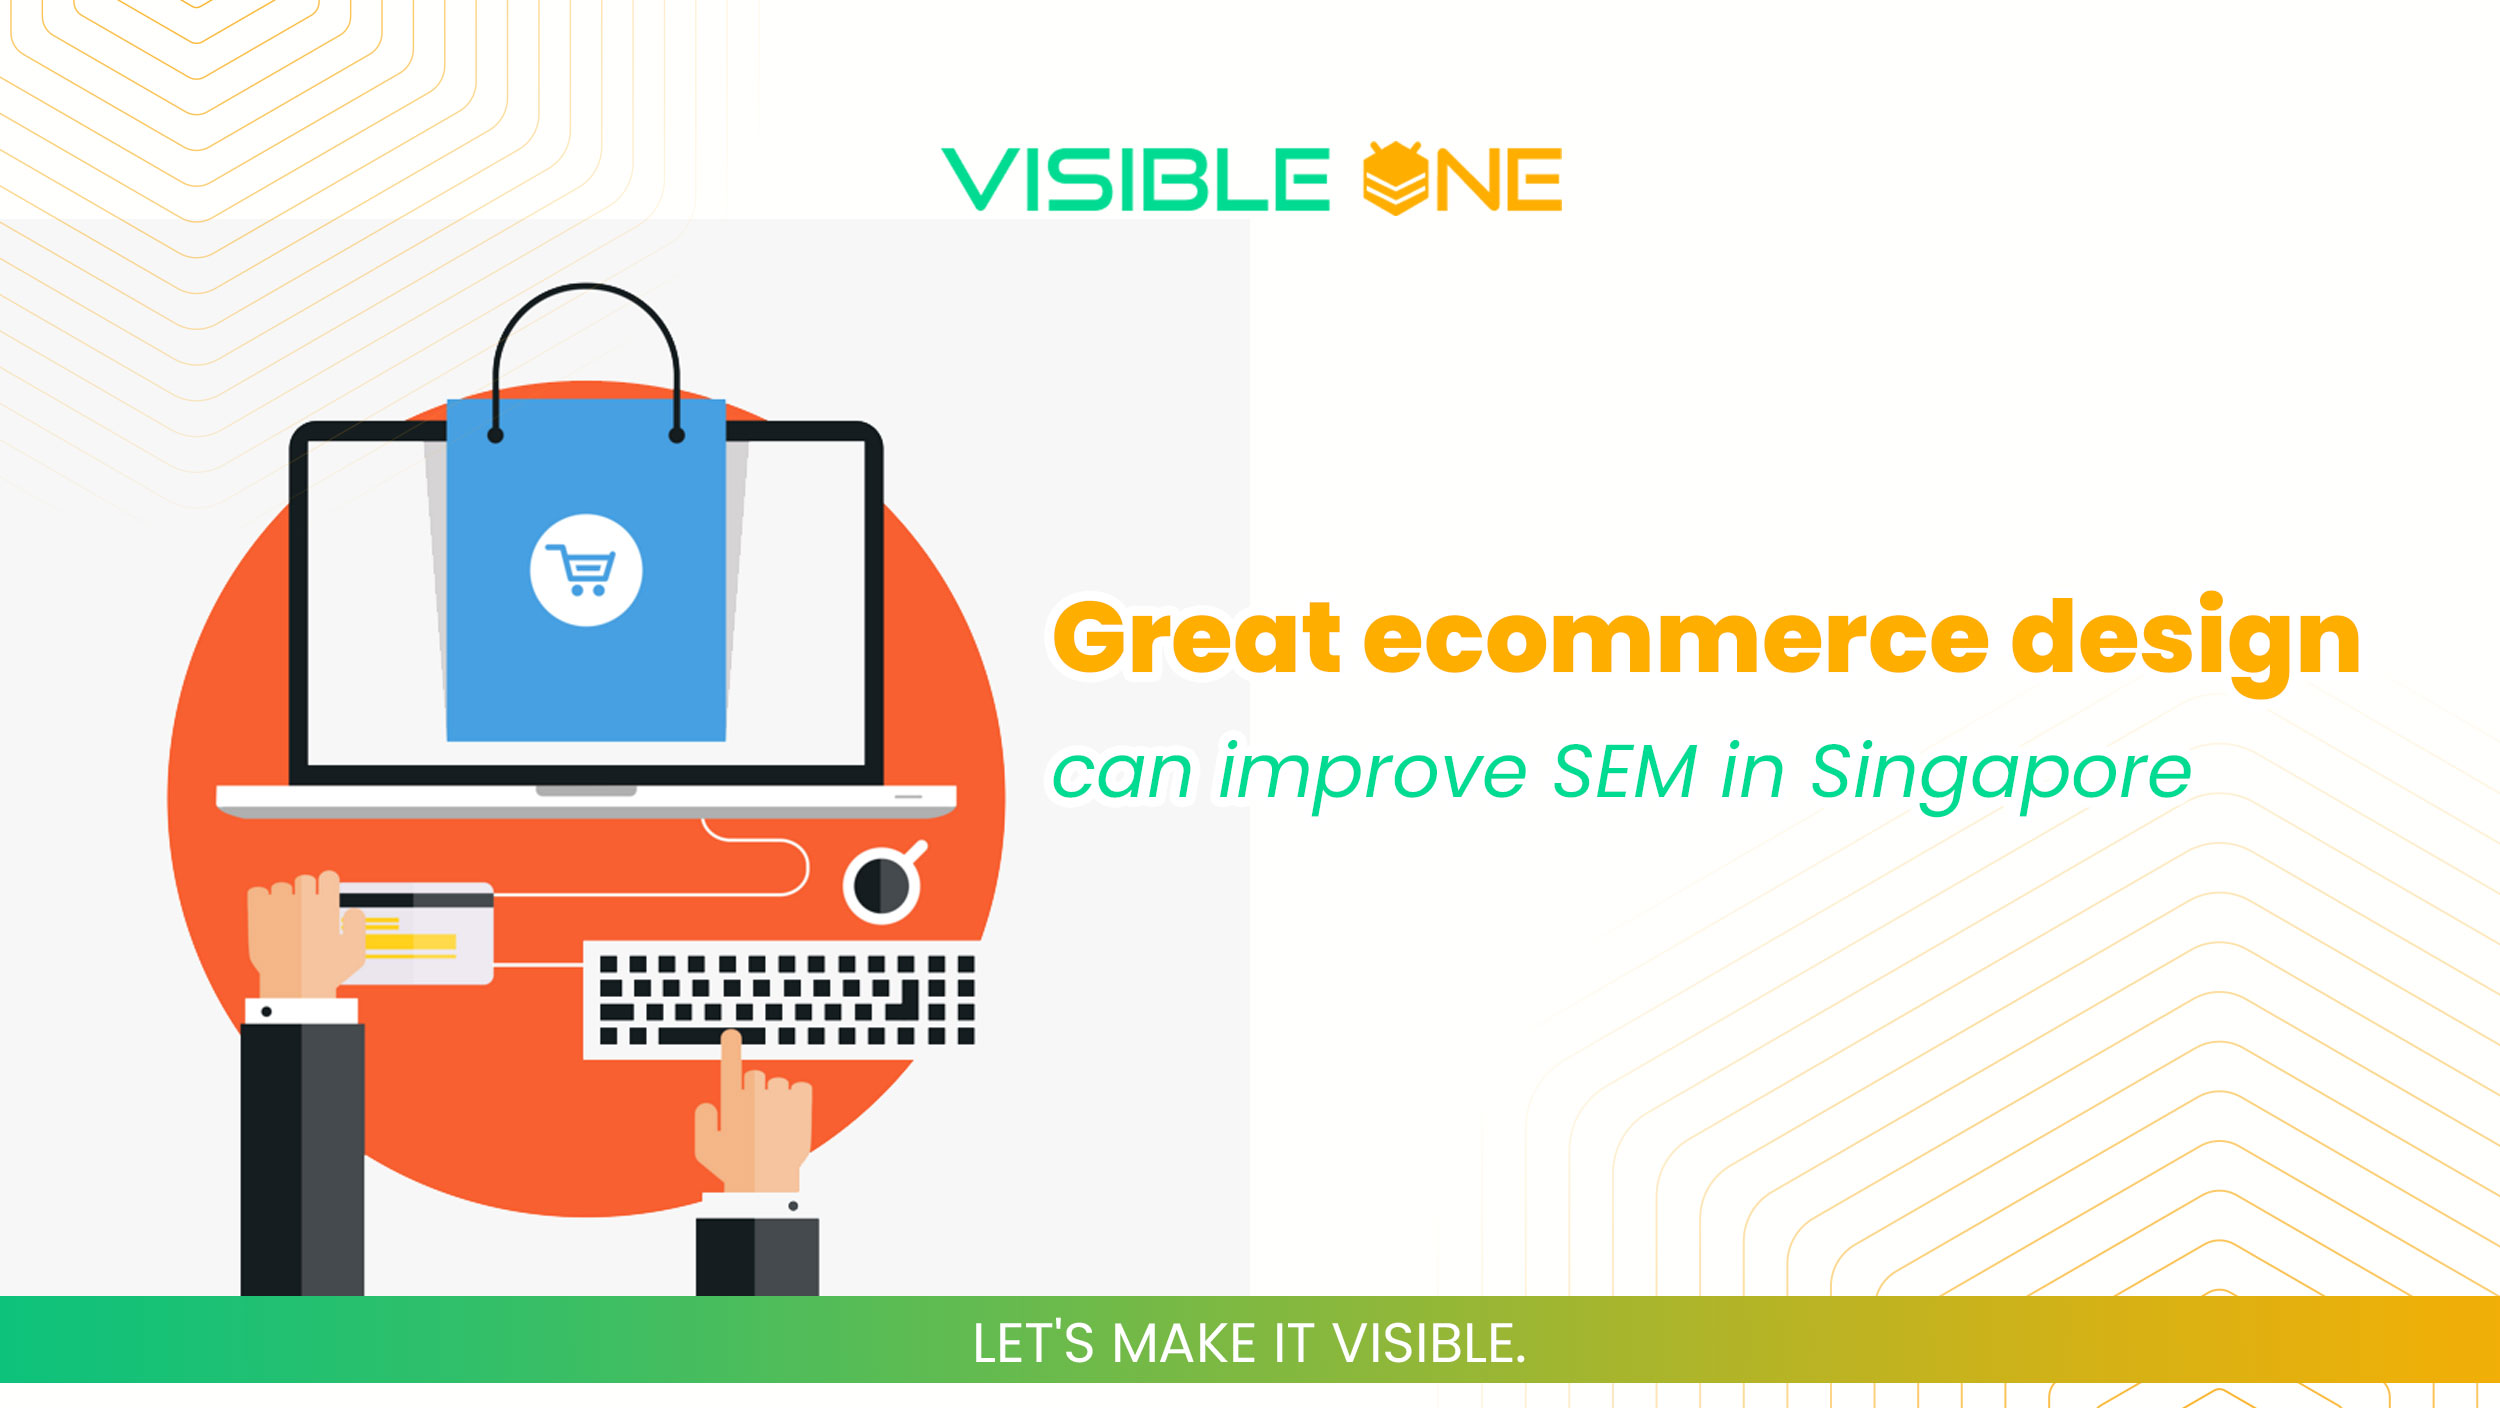 Great ecommerce design can improve SEM in Singapore